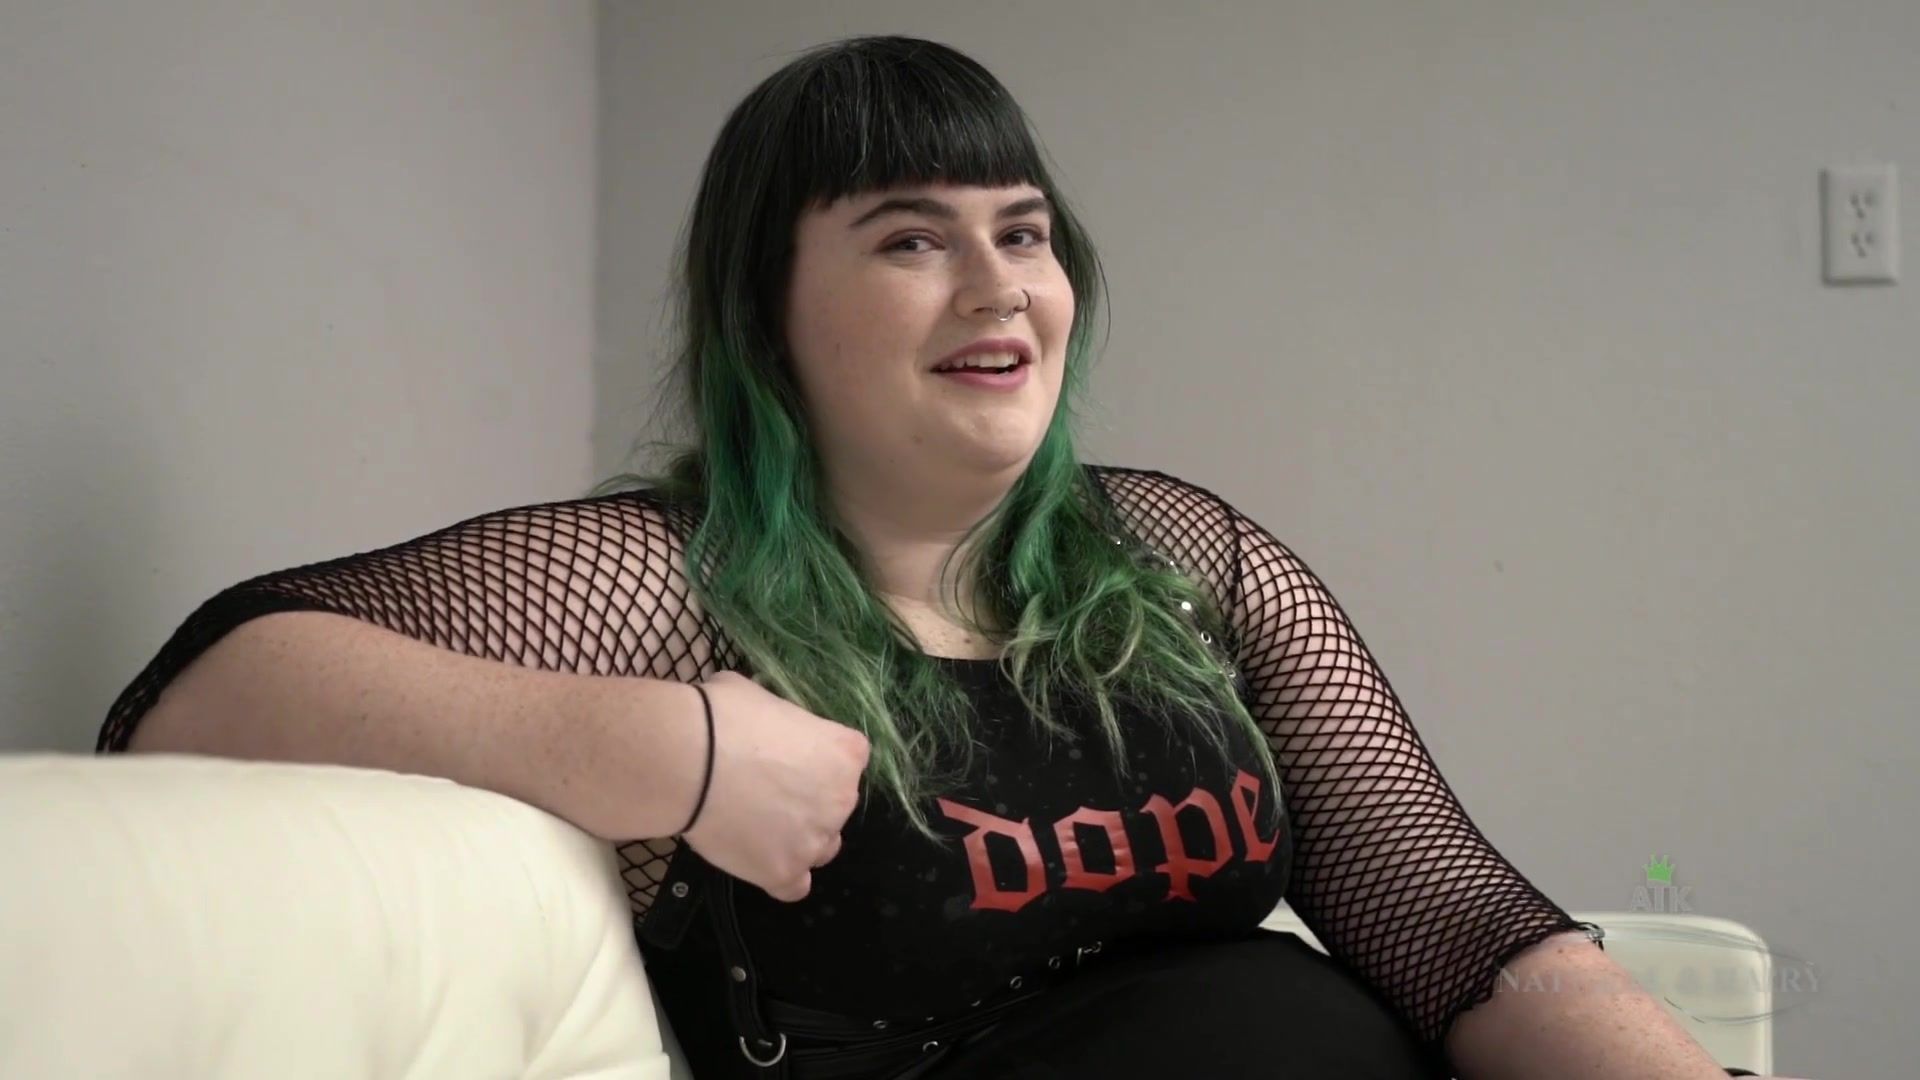 Pigtails Amoral plumper Cece talks about sex Sexy Girl